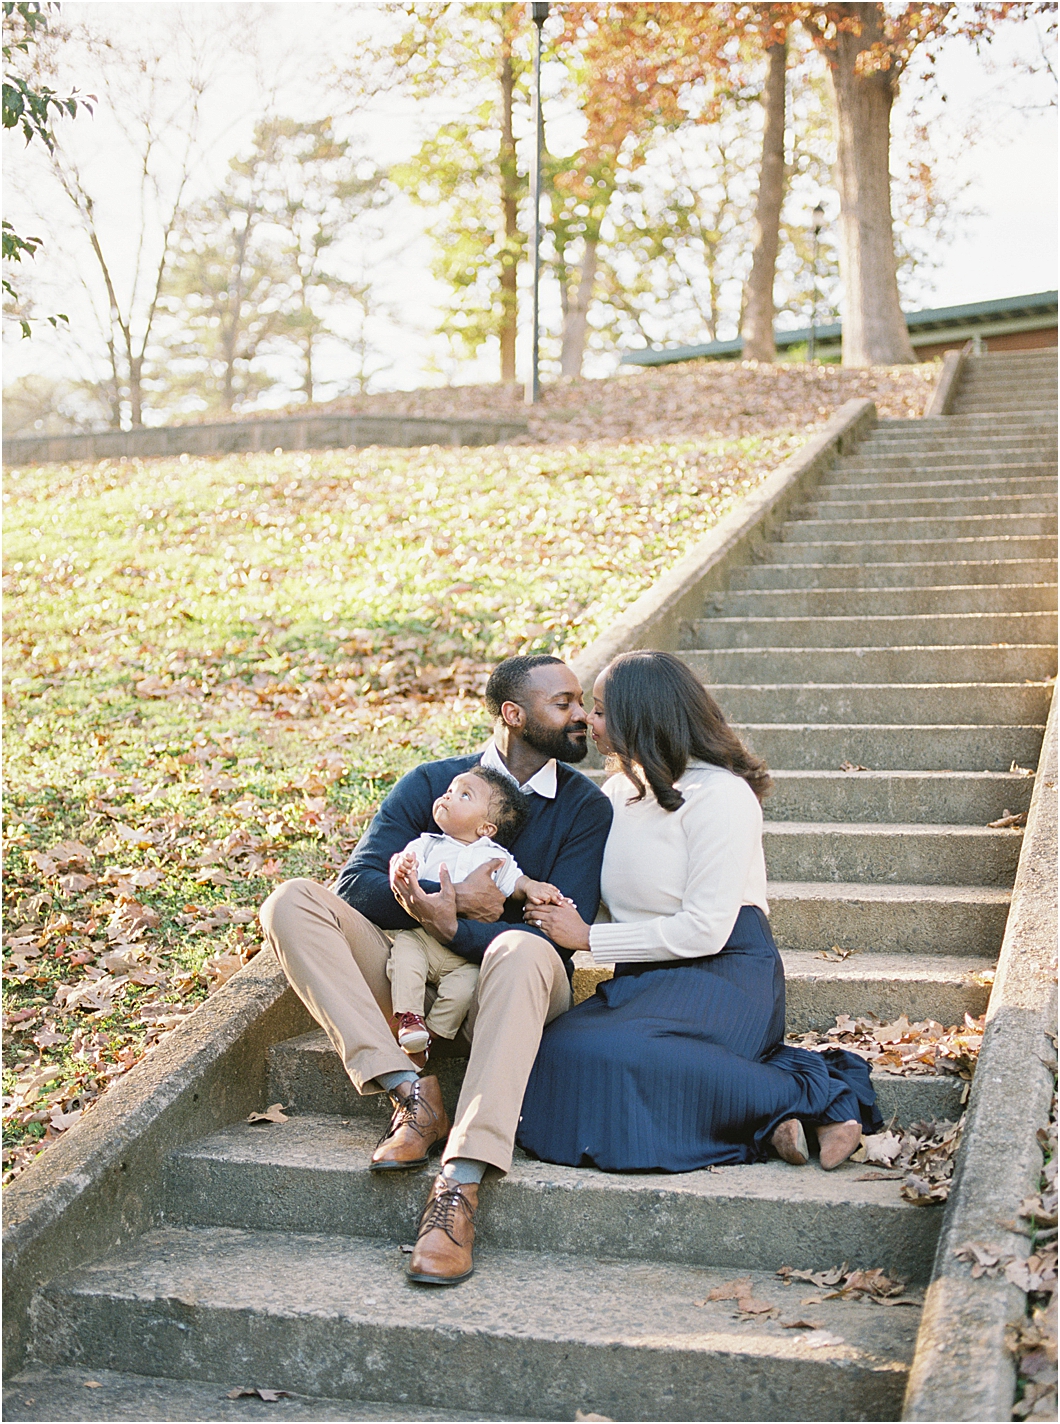  Freedom Park family photos in downtown Charlotte by Hillary Muelleck